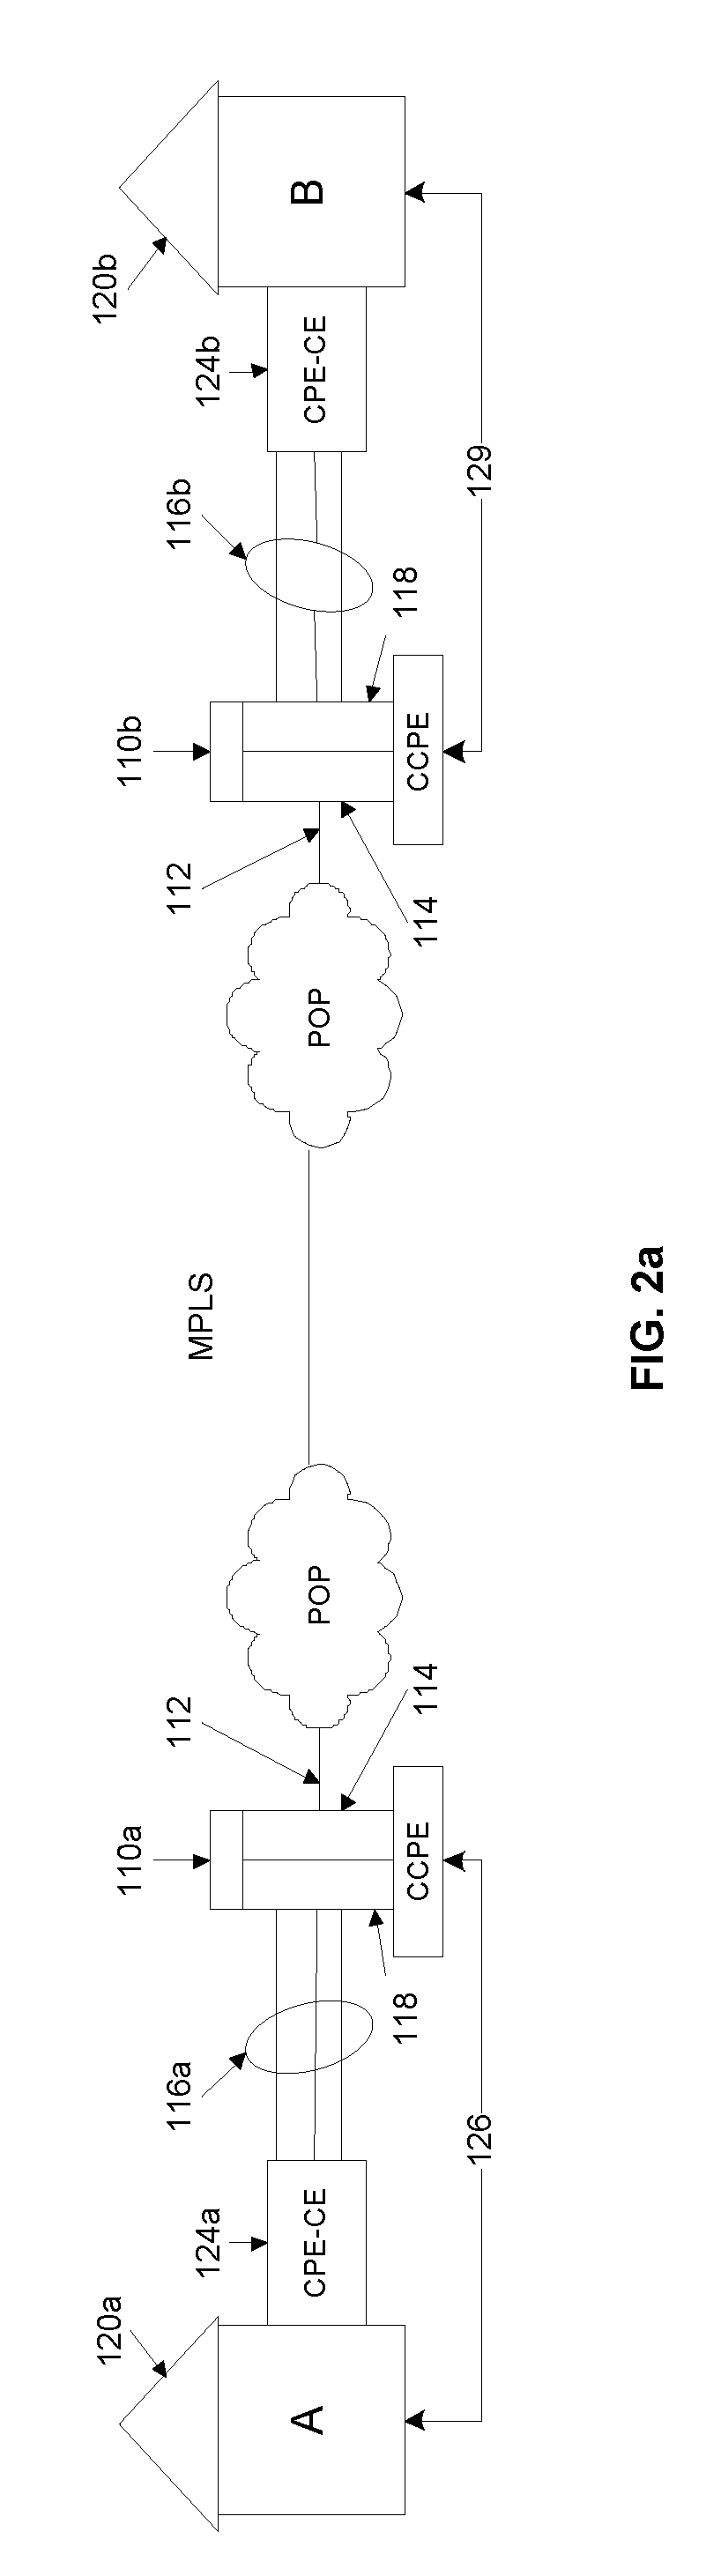 System, apparatus and method for providing a virtual network edge and overlay with virtual control plane